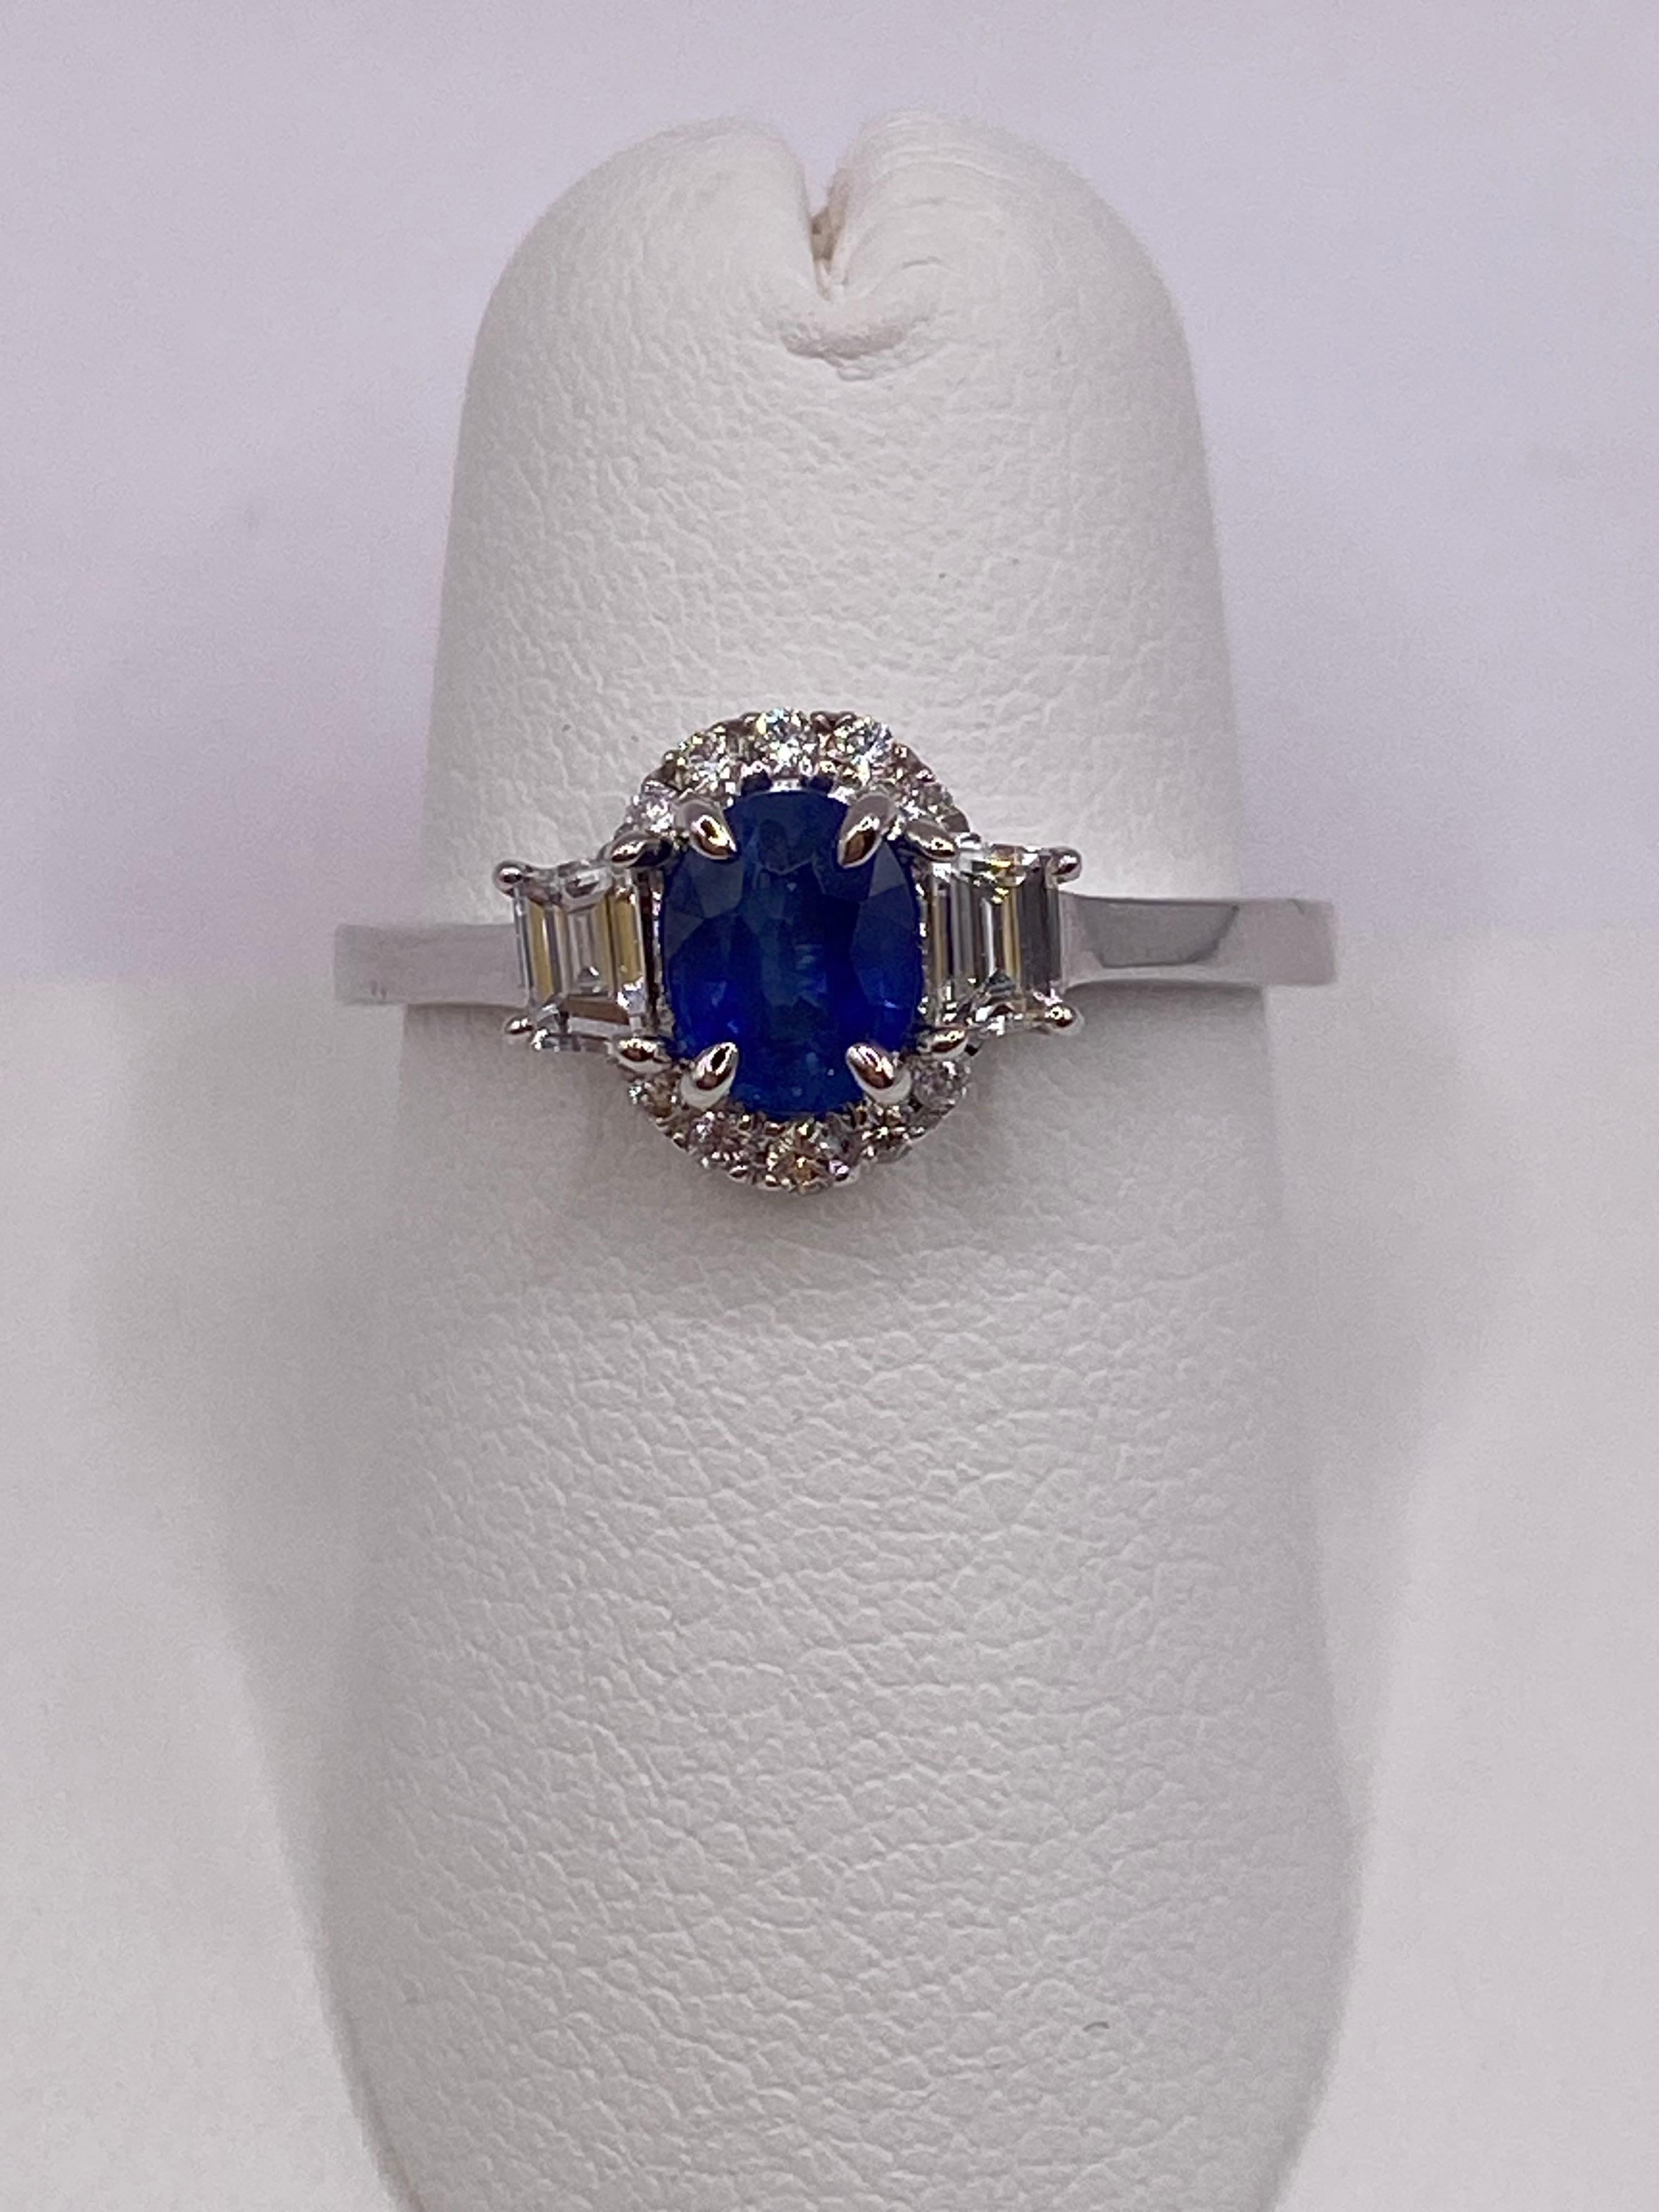 Metal: Platinum
Finger Size: 6.5
(Ring is size 6.5, but is sizable upon request)

Number of Oval Sapphires: 1
Carat Weight: 0.79ctw
Stone Size: 6.0 x 4.5mm

Number of Step Cut Trapezoid Diamonds: 2
Carat Weight: 0.28ctw

Number of Round Diamonds: